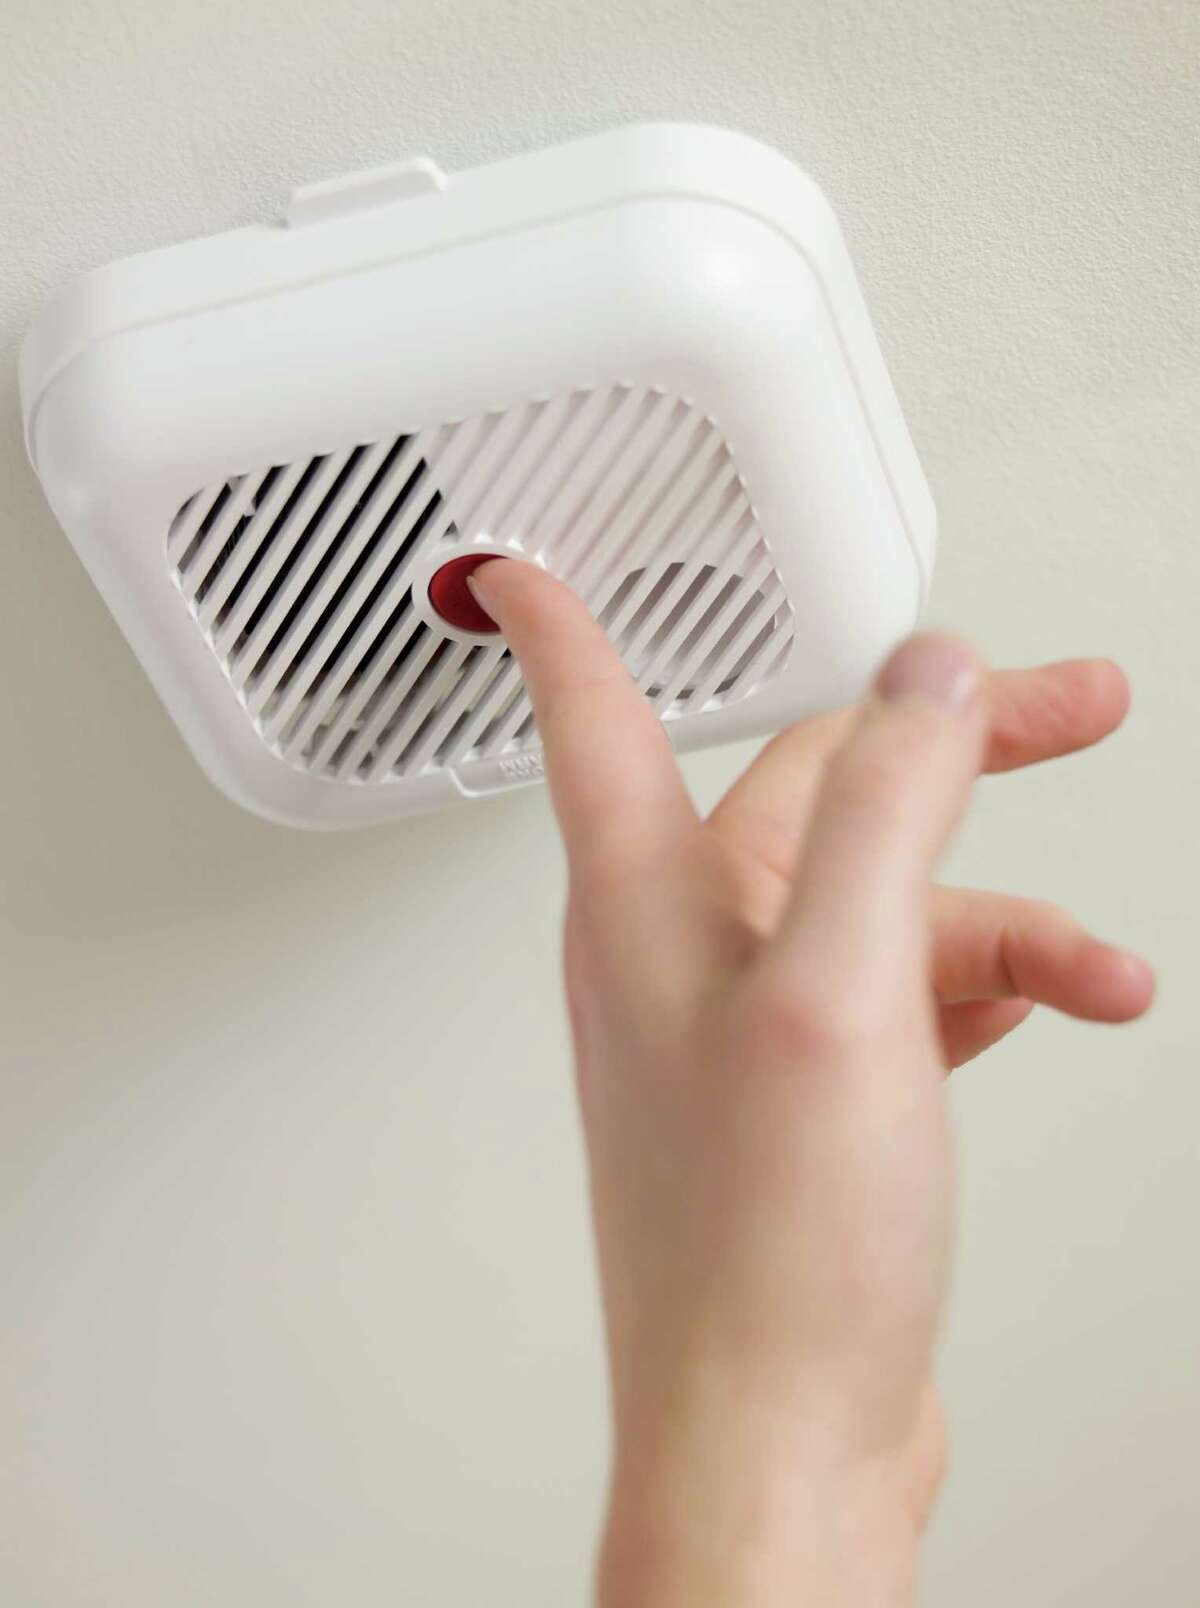 Check smoke detectors and change batteries. If your home has older ionization detectors, consider changing out for more sensitive photoelectric units. Read about the differences.